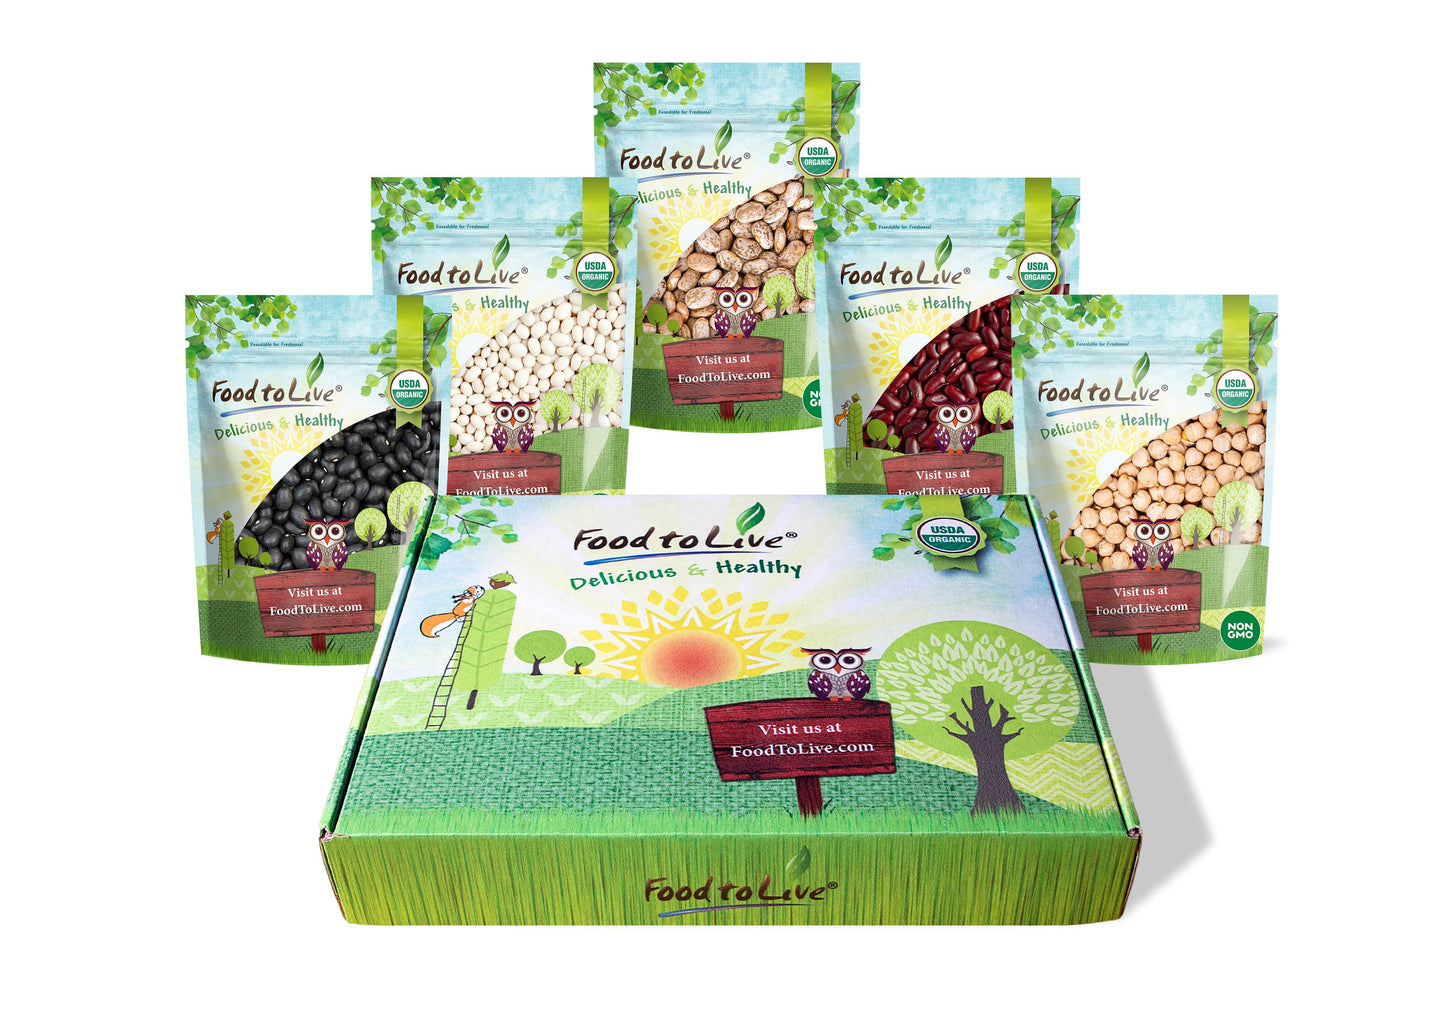 Organic Beans in a Gift Box - A Variety Pack of Pinto Beans, Dark Red Kidney Beans, Black Beans, Navy Beans, Garbanzo Beans-by Food to Live